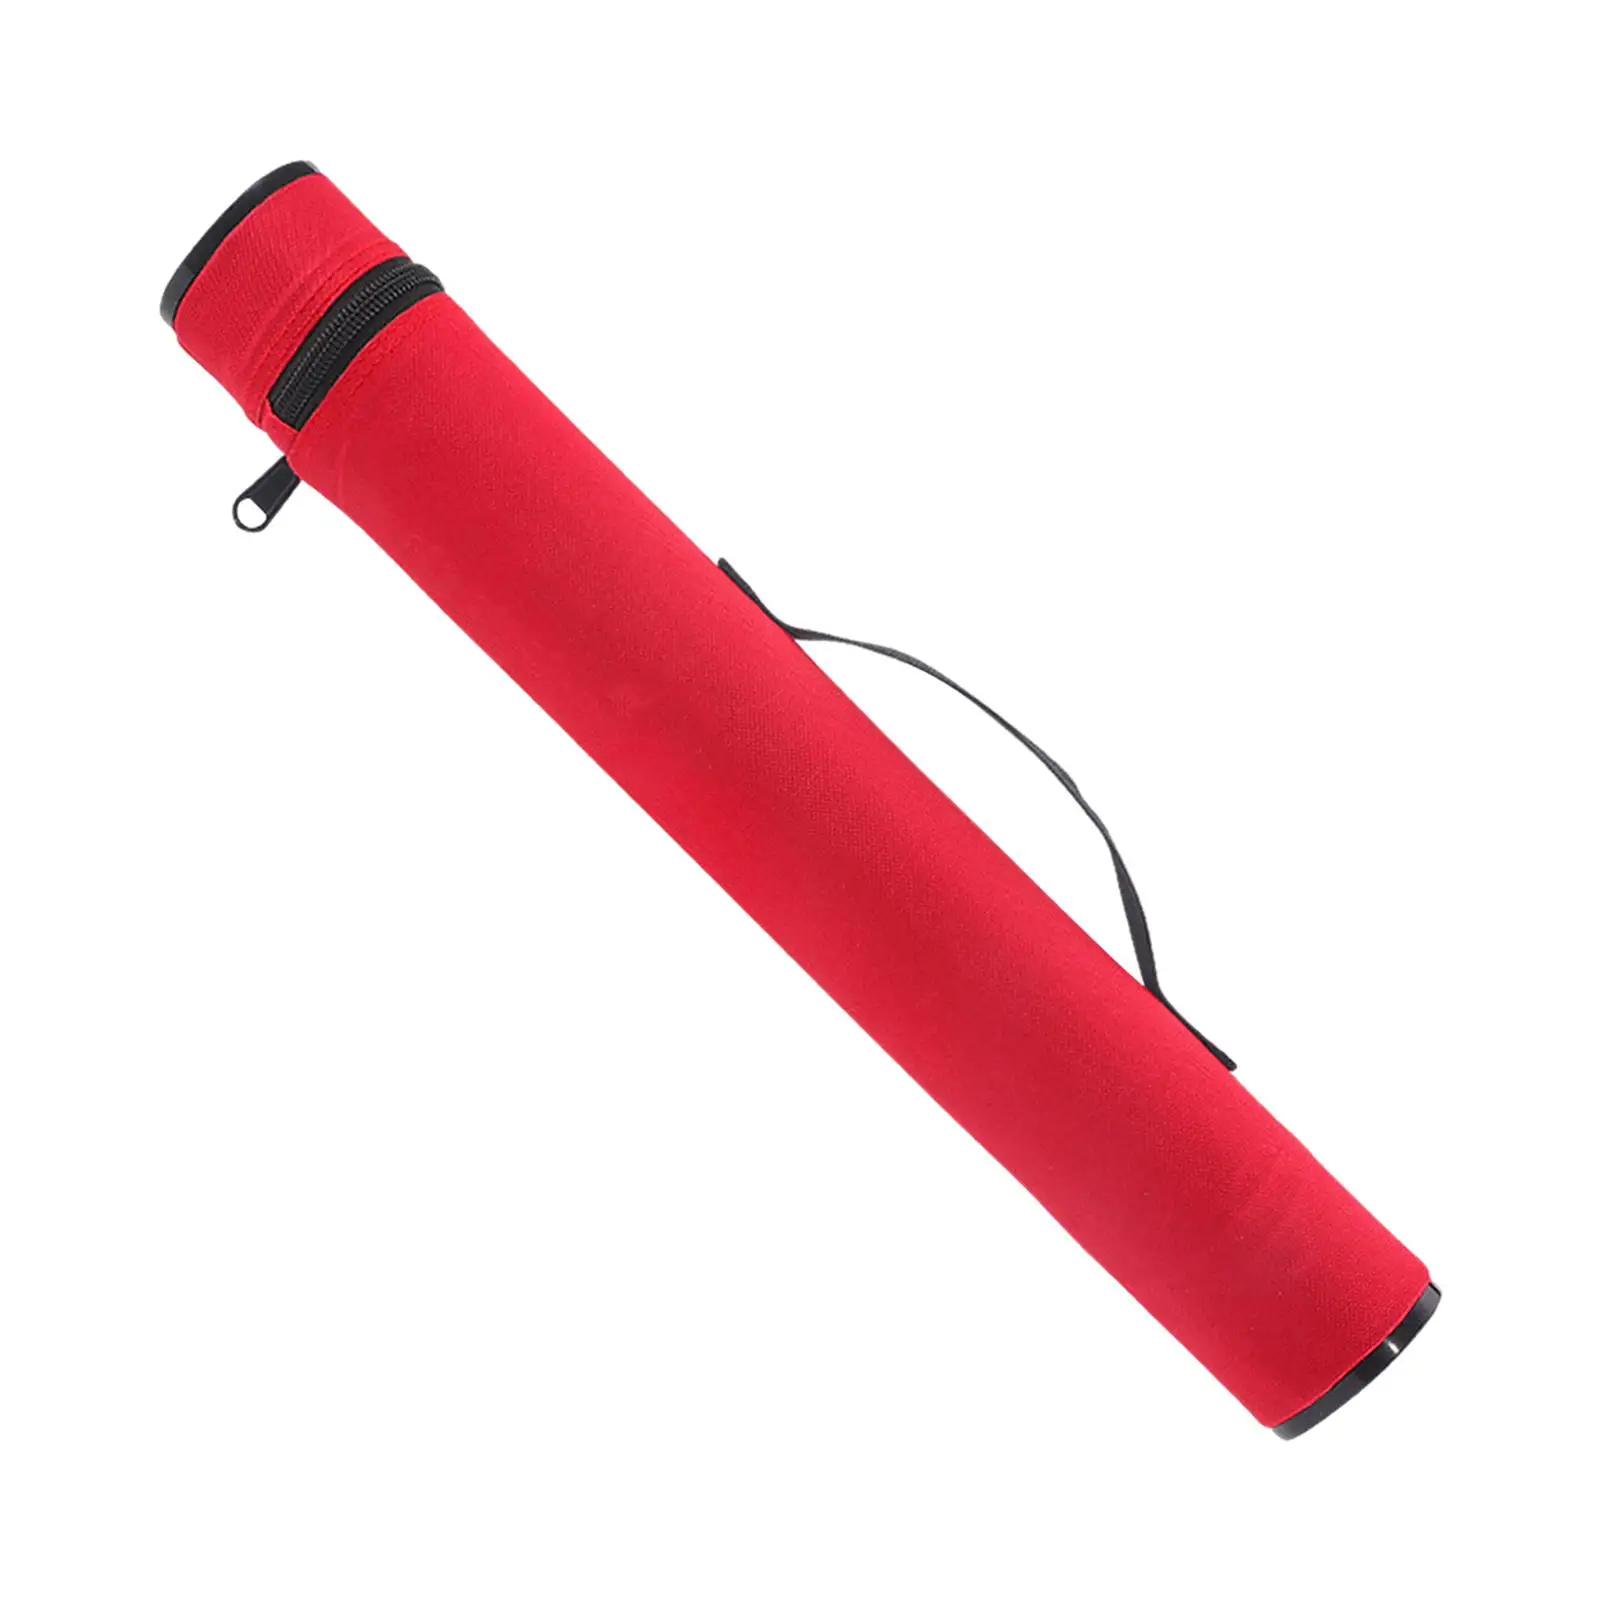 Fly Fishing Rods Case Accessories Protective Cover Wear Resistance with Shoulder Strap Fishing Pole Storage Bag Travel Case